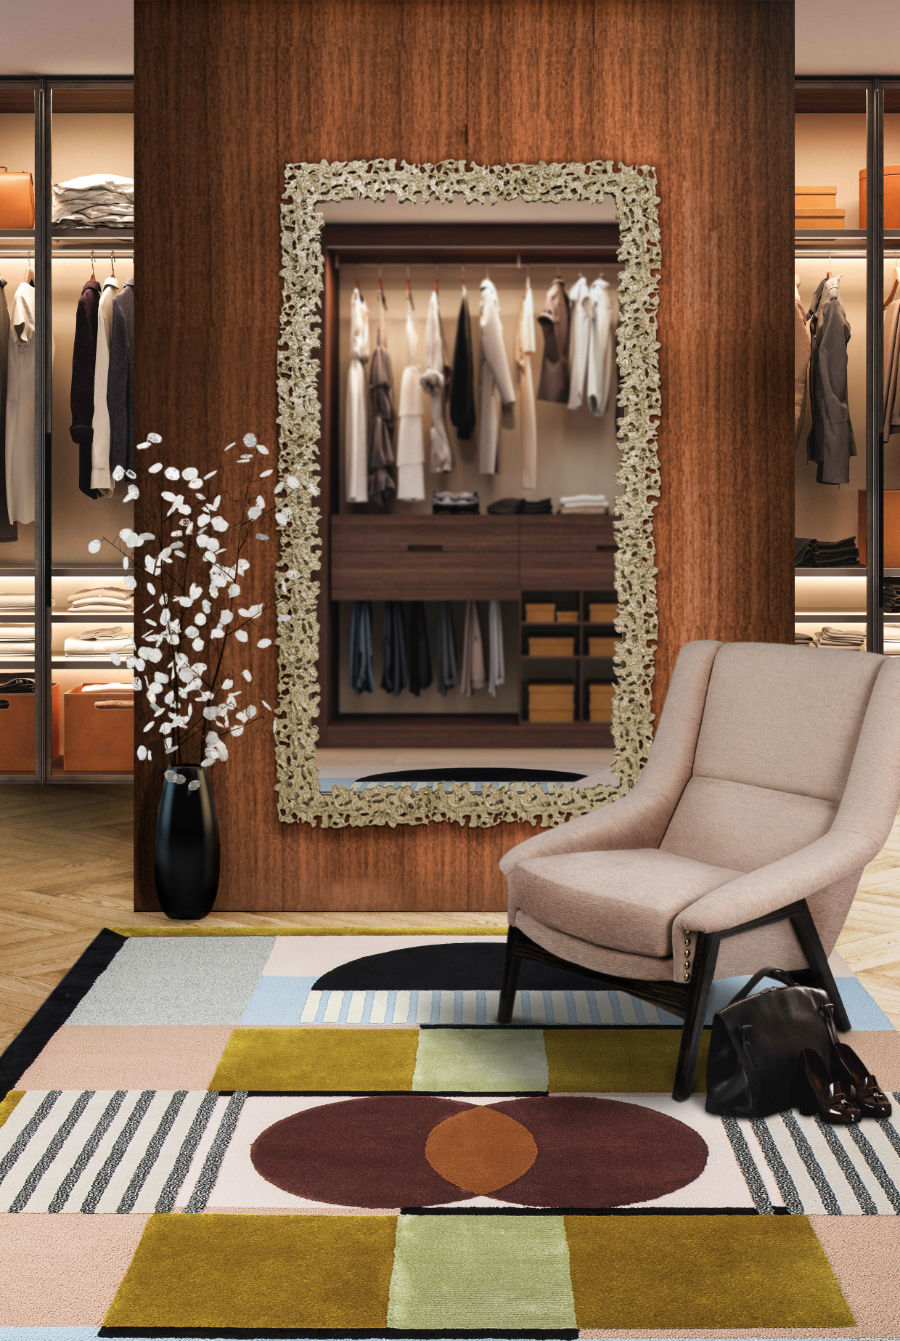 Modern Closets To Get Ready For Your Day - With A INCA Armchair home inspiration ideas